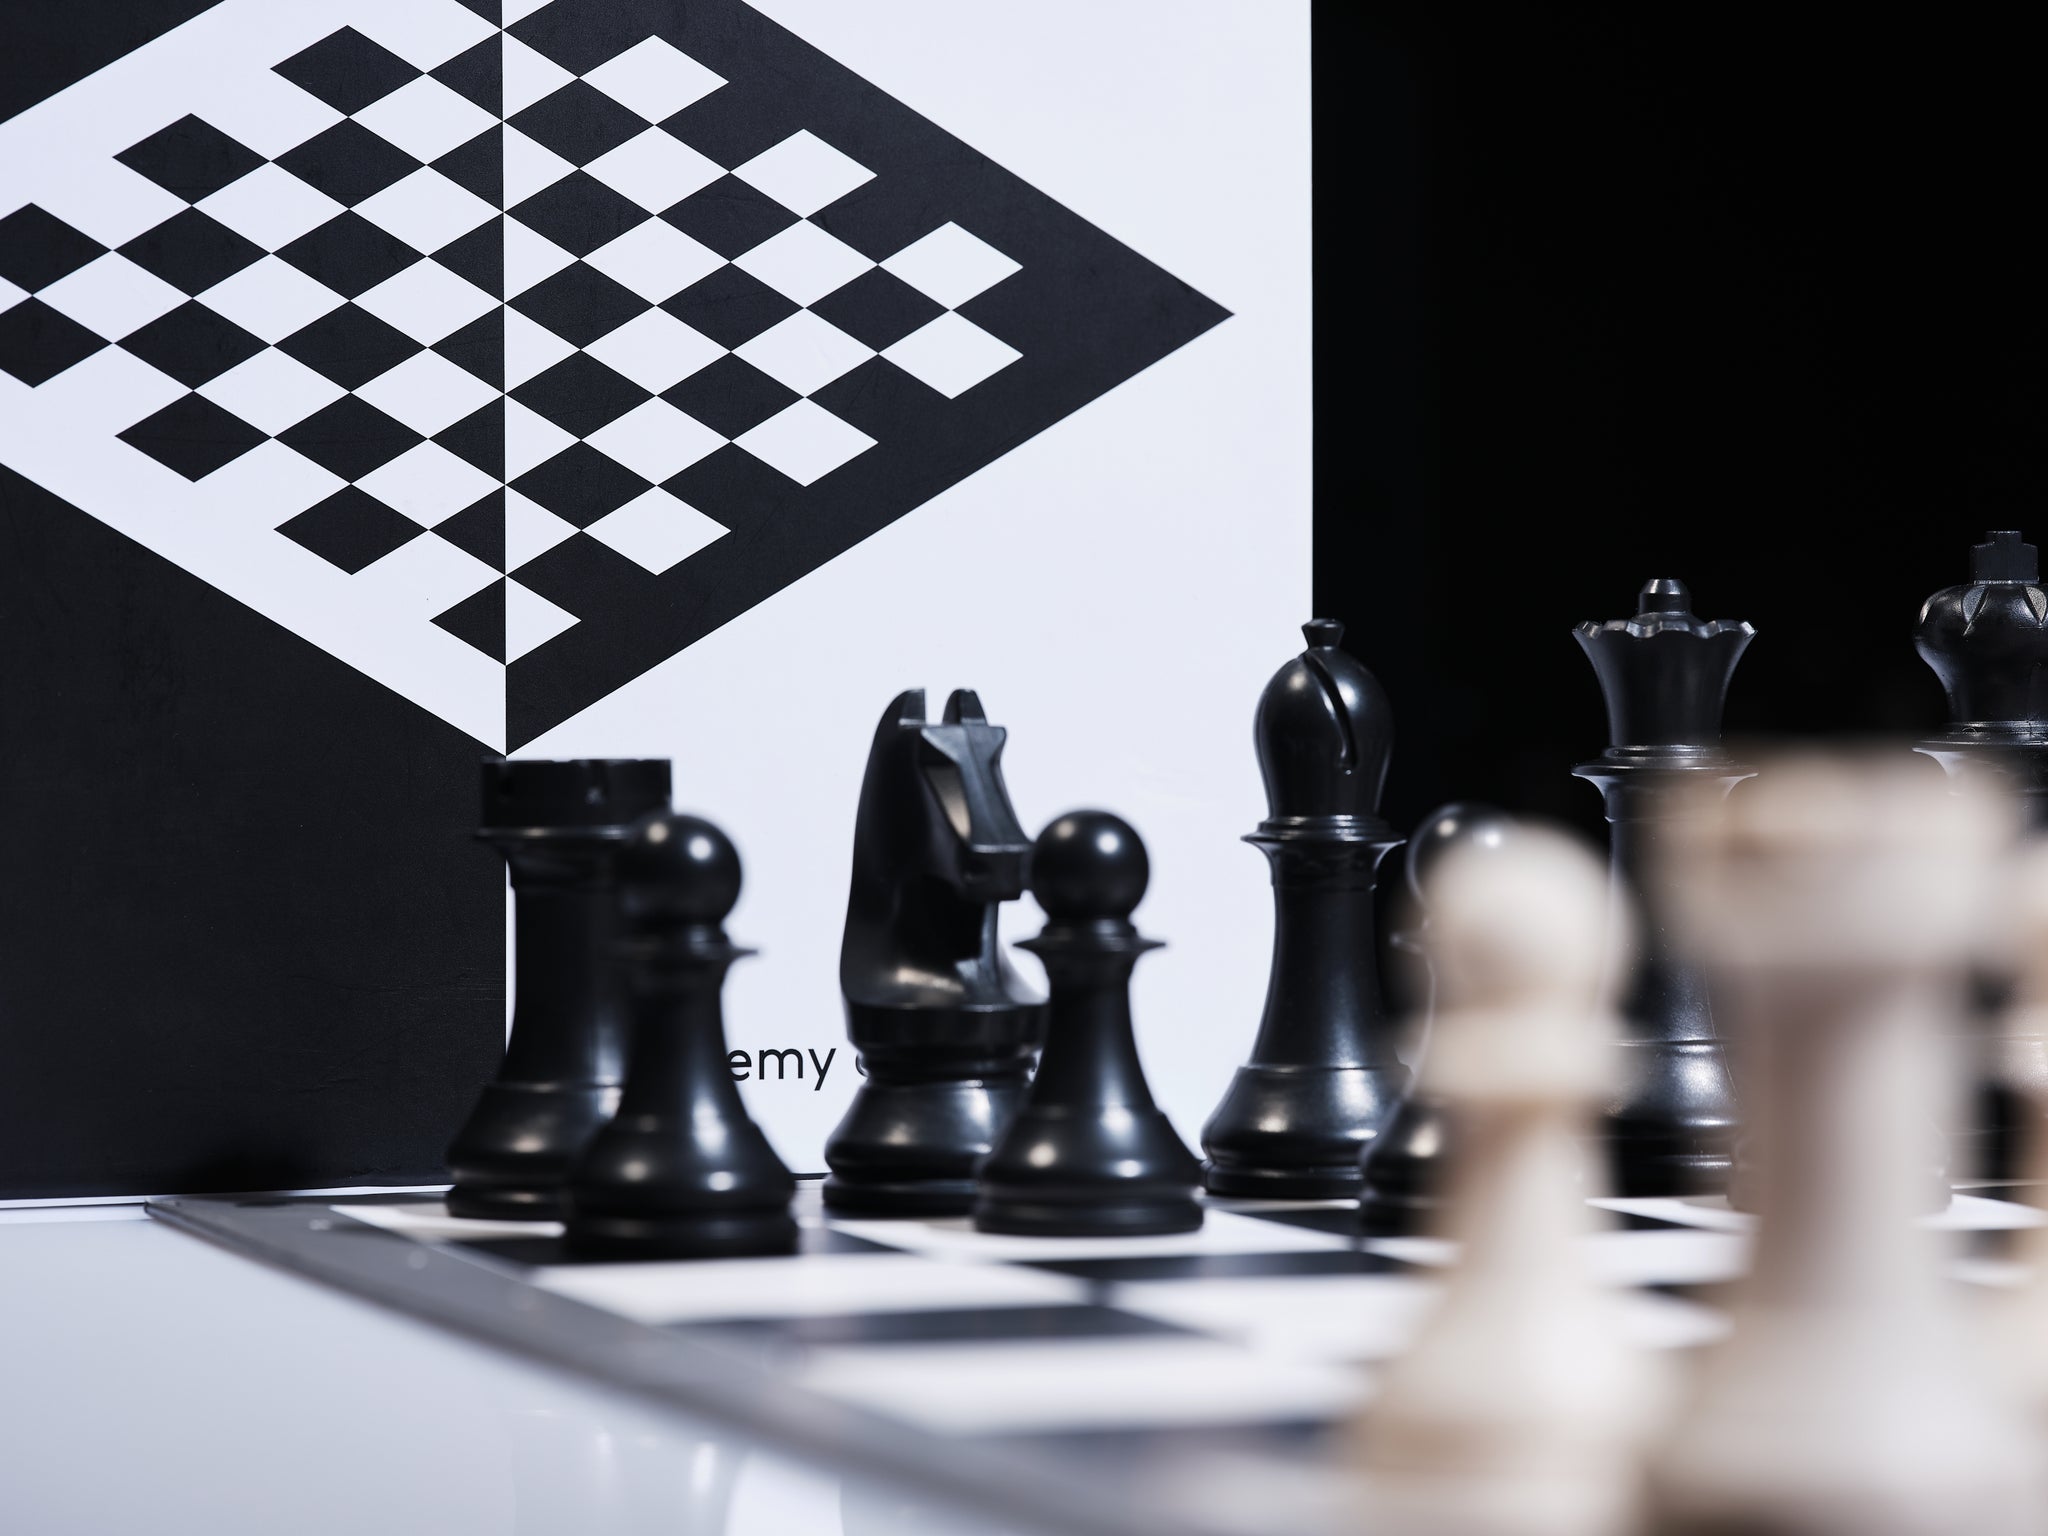 REVIEW: Official Academy Chess Set (Plastic World Championship